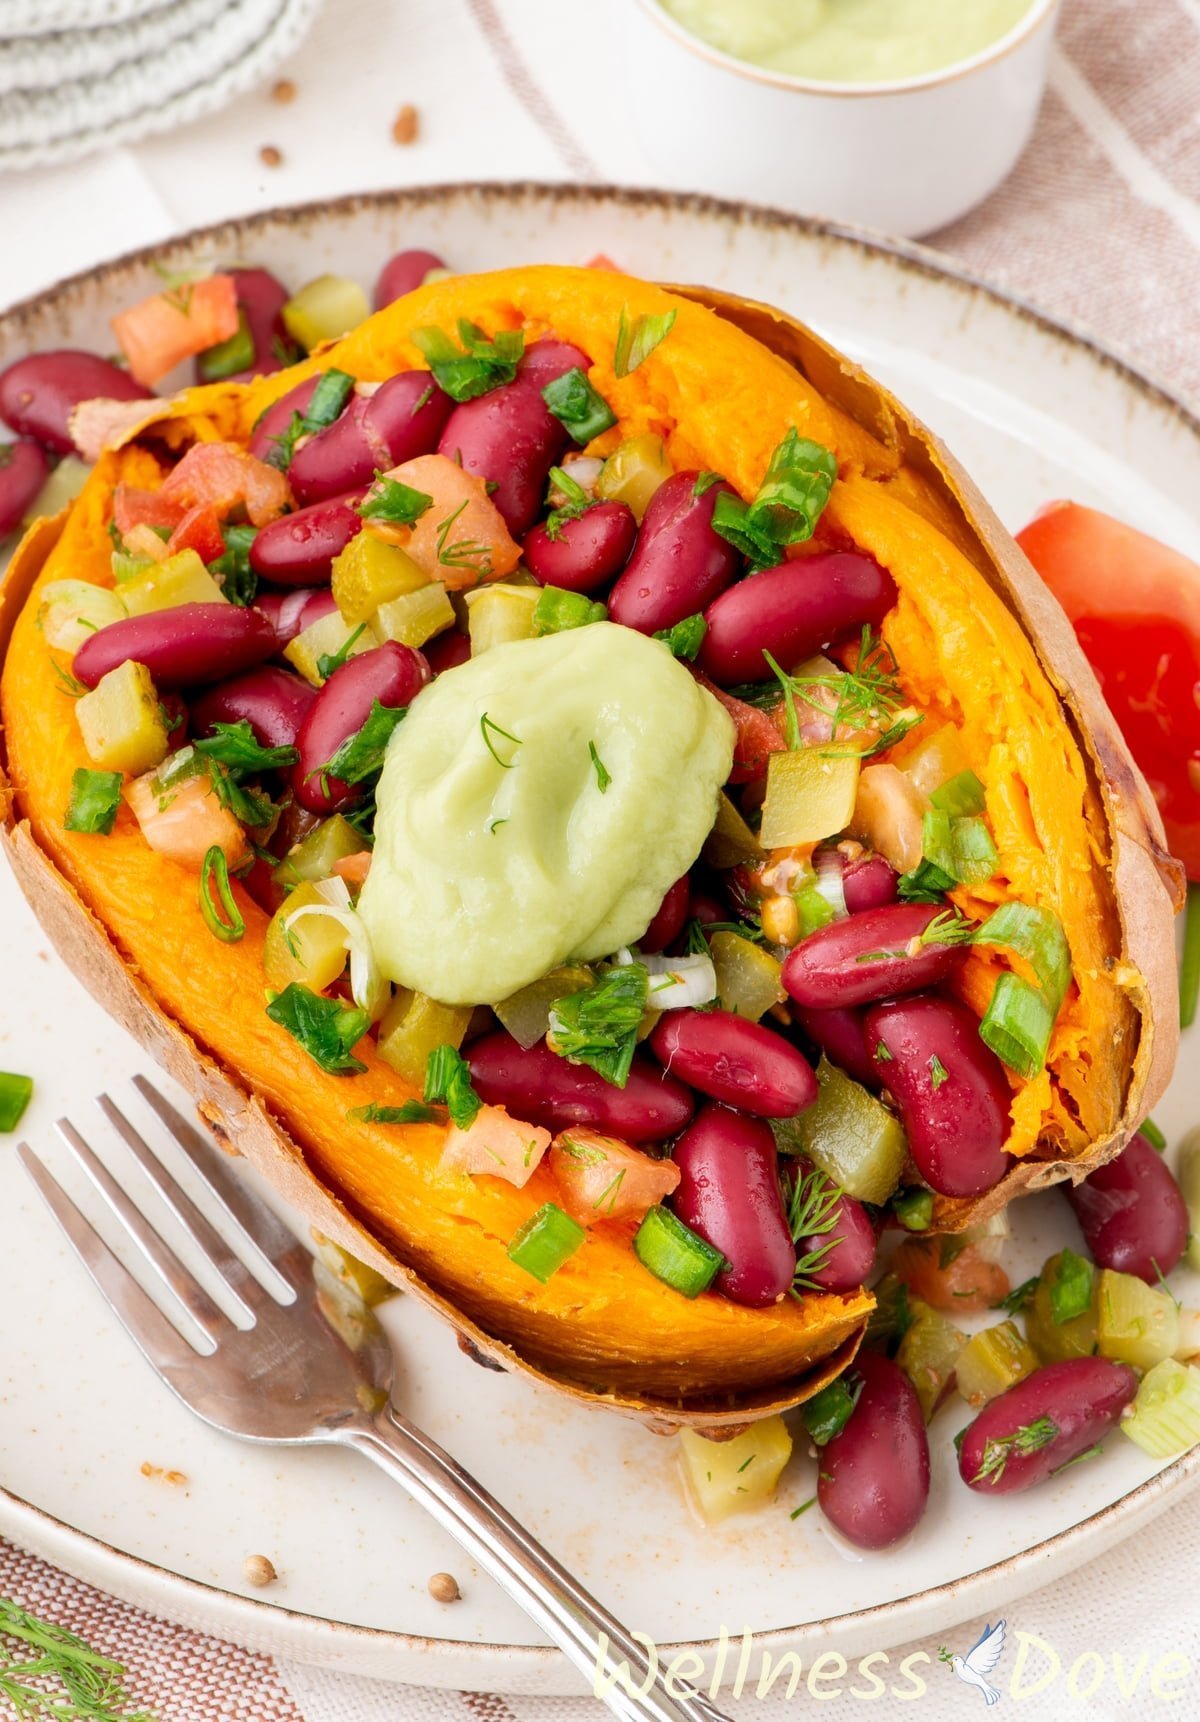 Recipe for Stuffed Sweet Potatoes with Beans | Healthy & Vegan